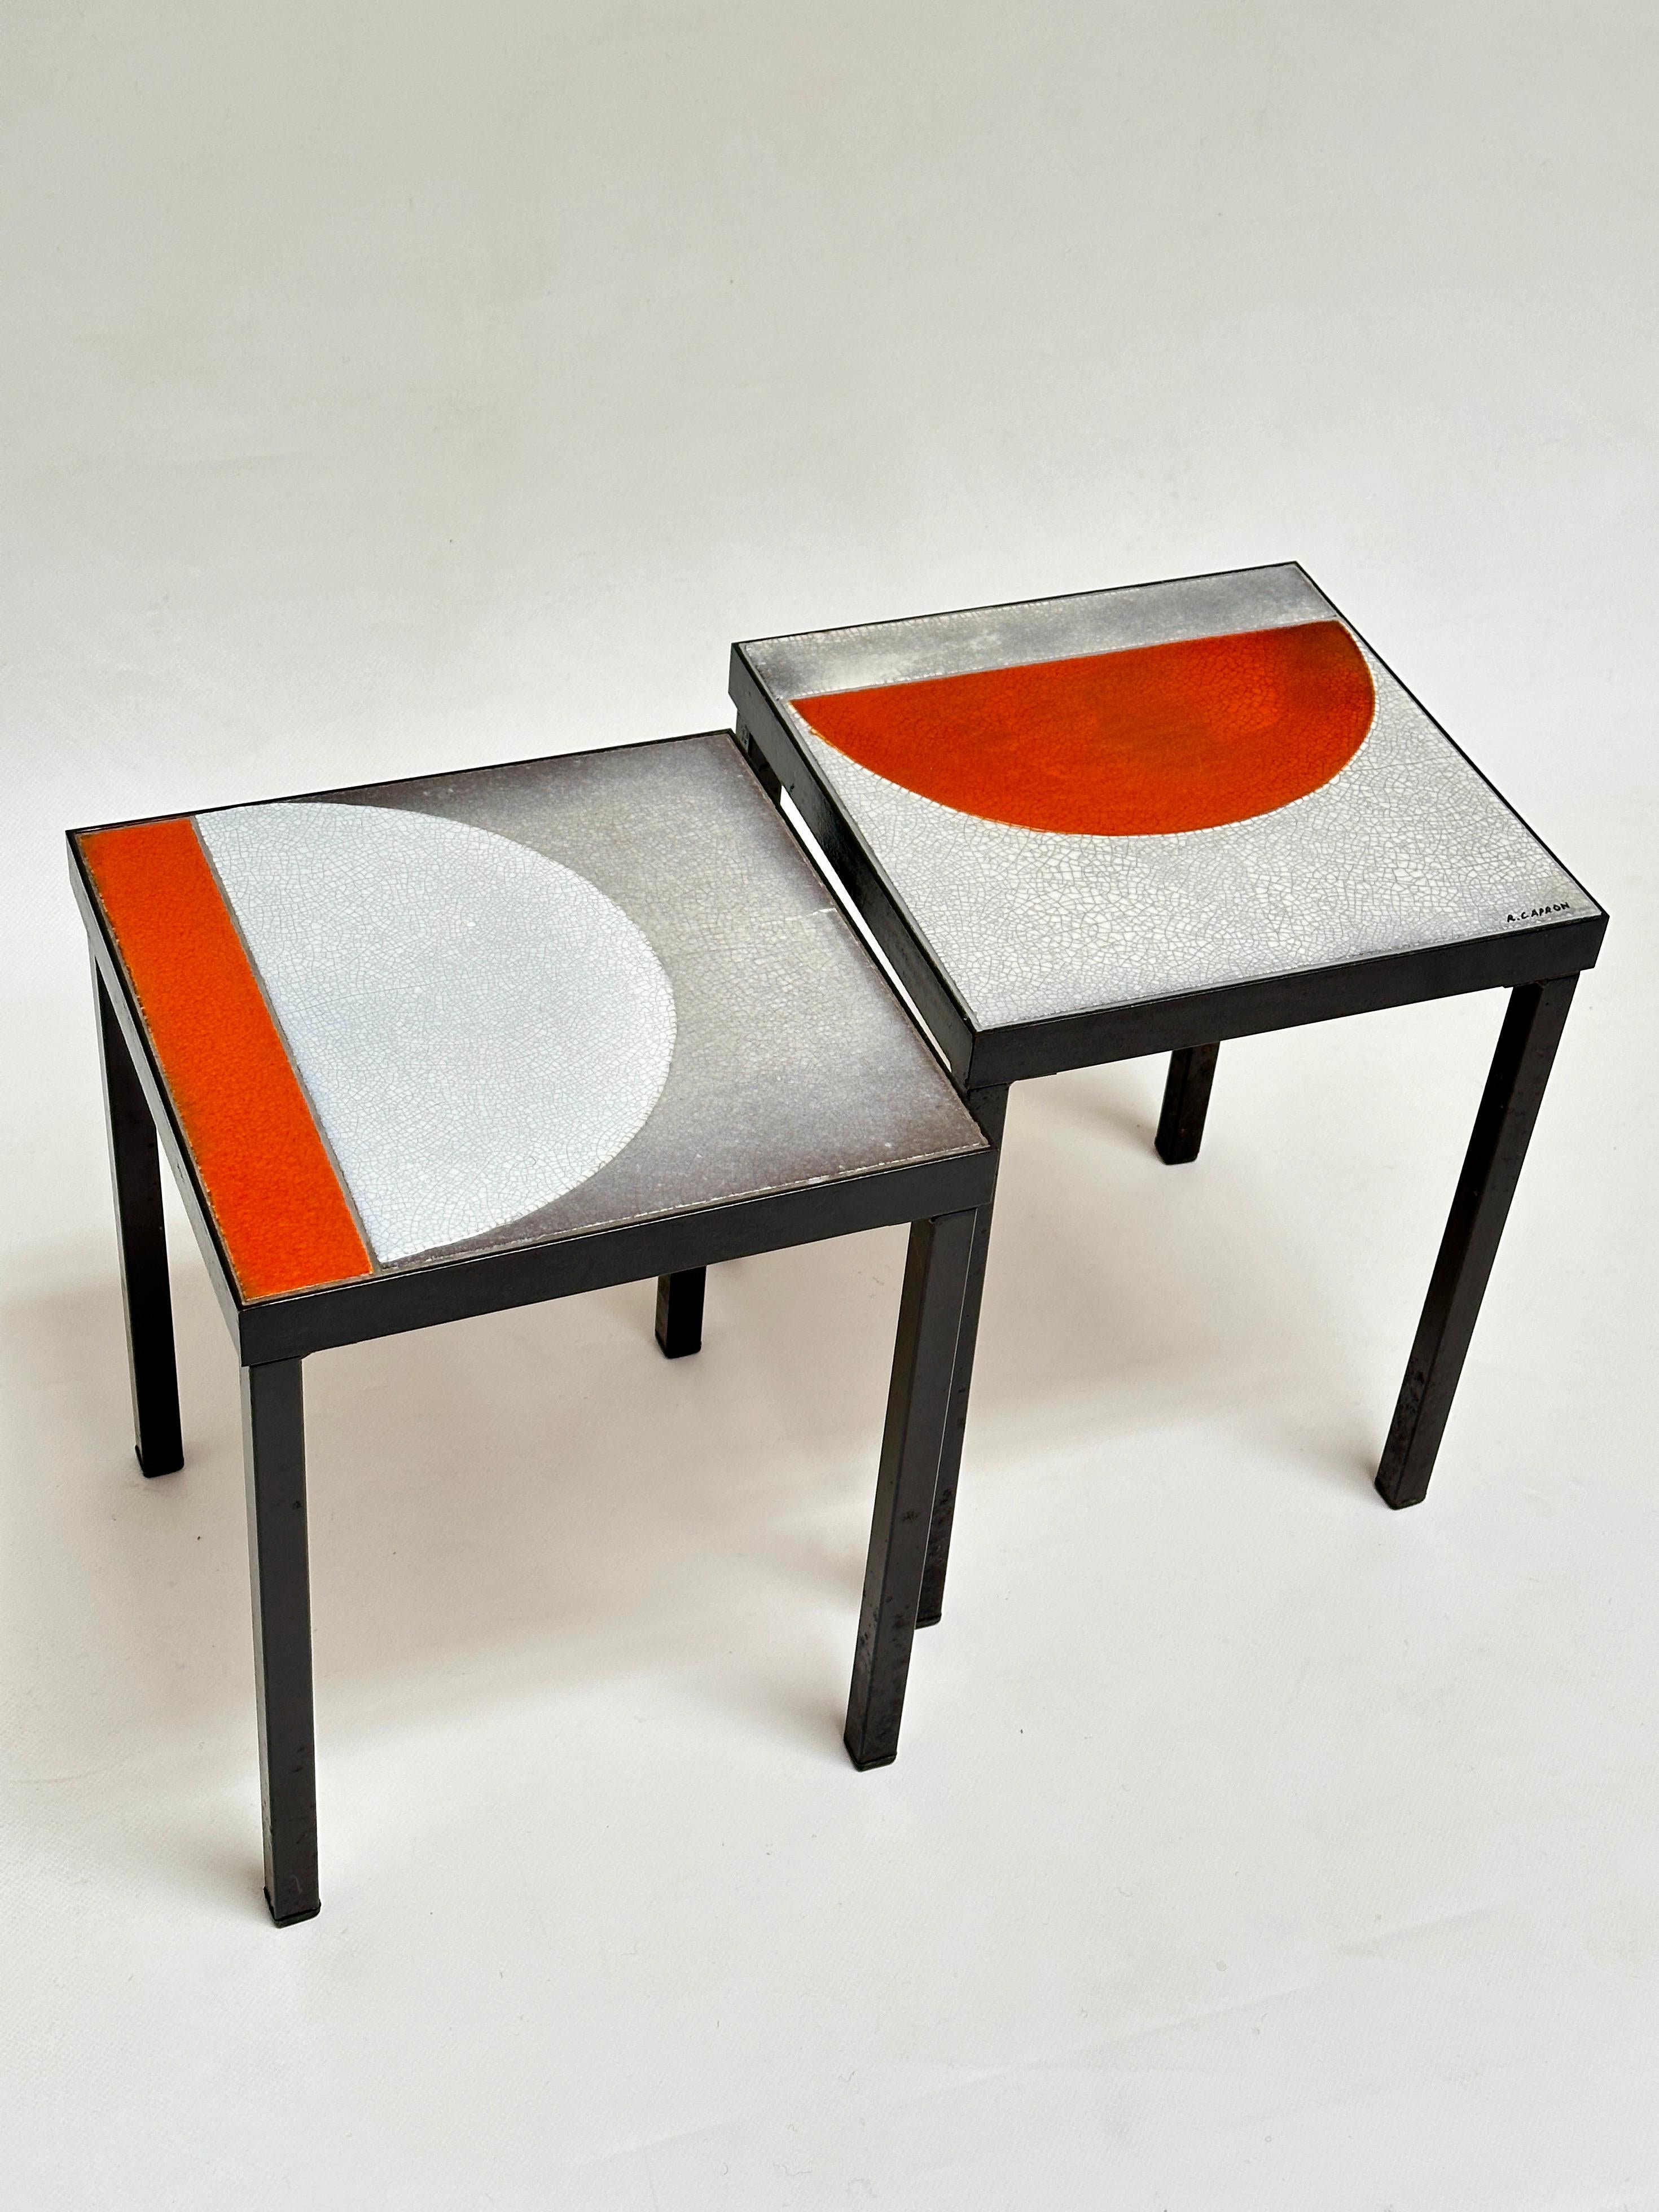 Pair of Low Tables, Roger Capron, Vallauris, c. 1965 In Good Condition For Sale In St Ouen, FR